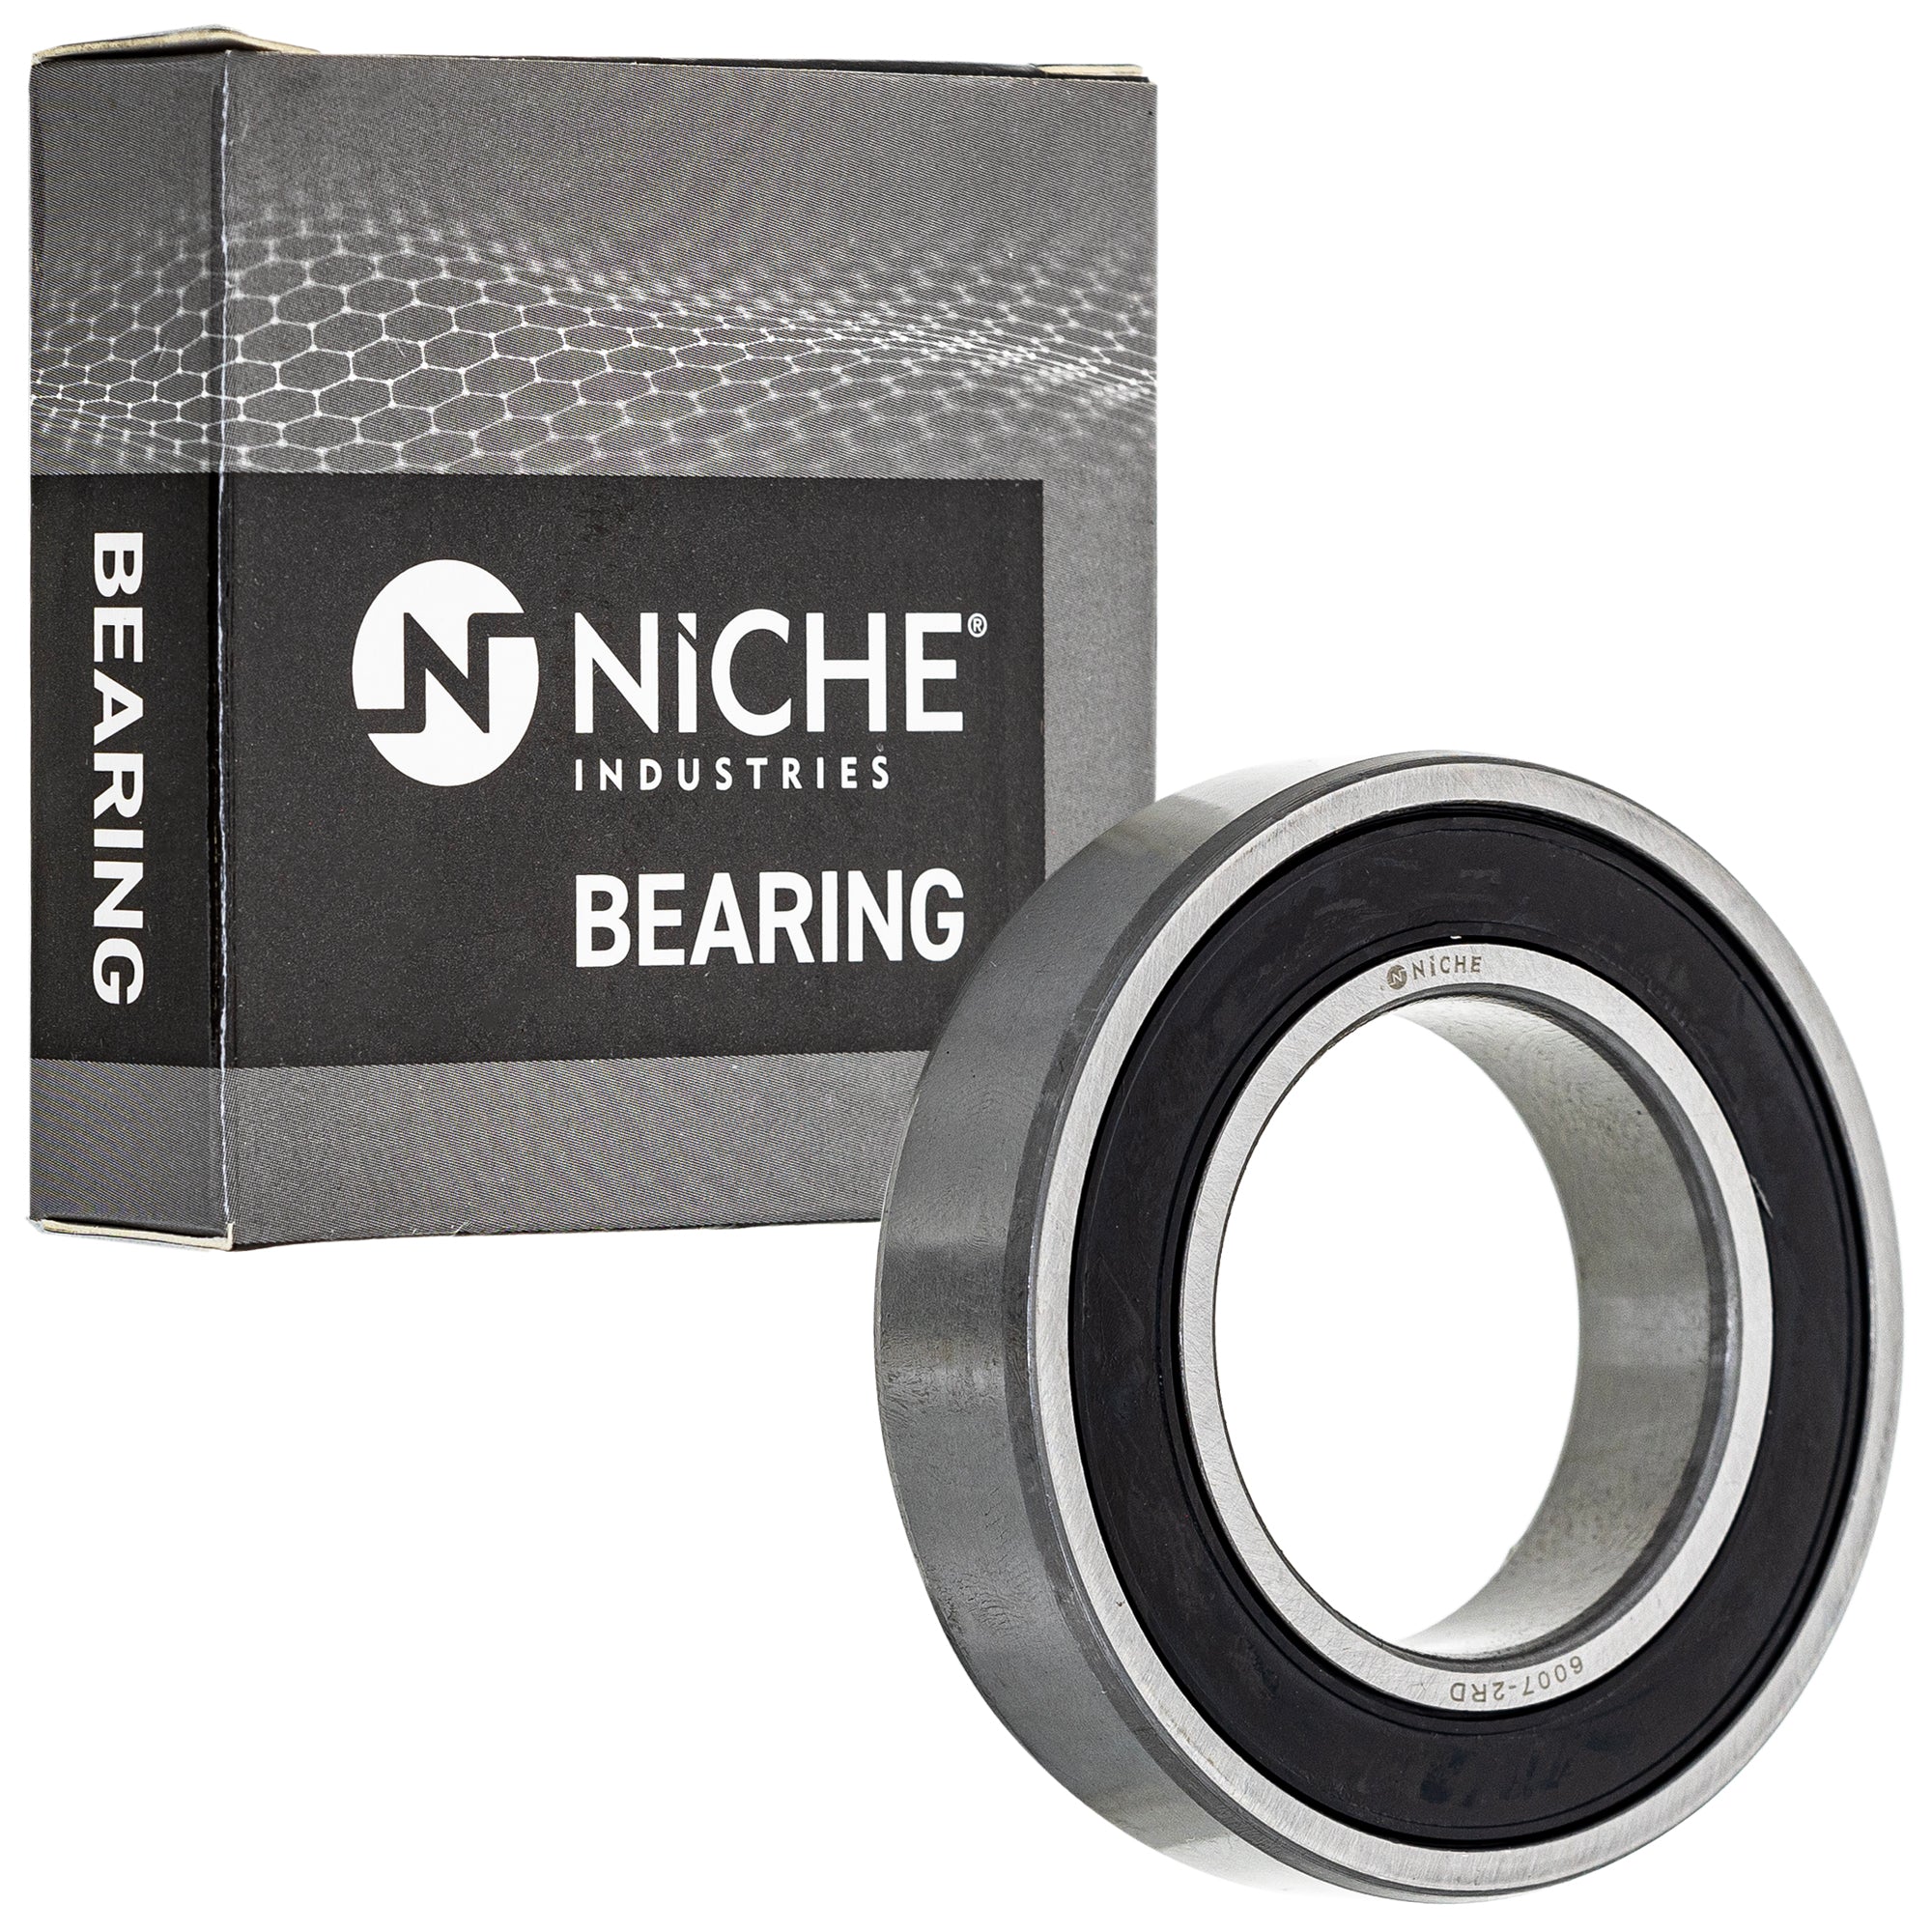 NICHE 519-CBB2274R Bearing & Seal Kit for zOTHER Tri Raptor Rally